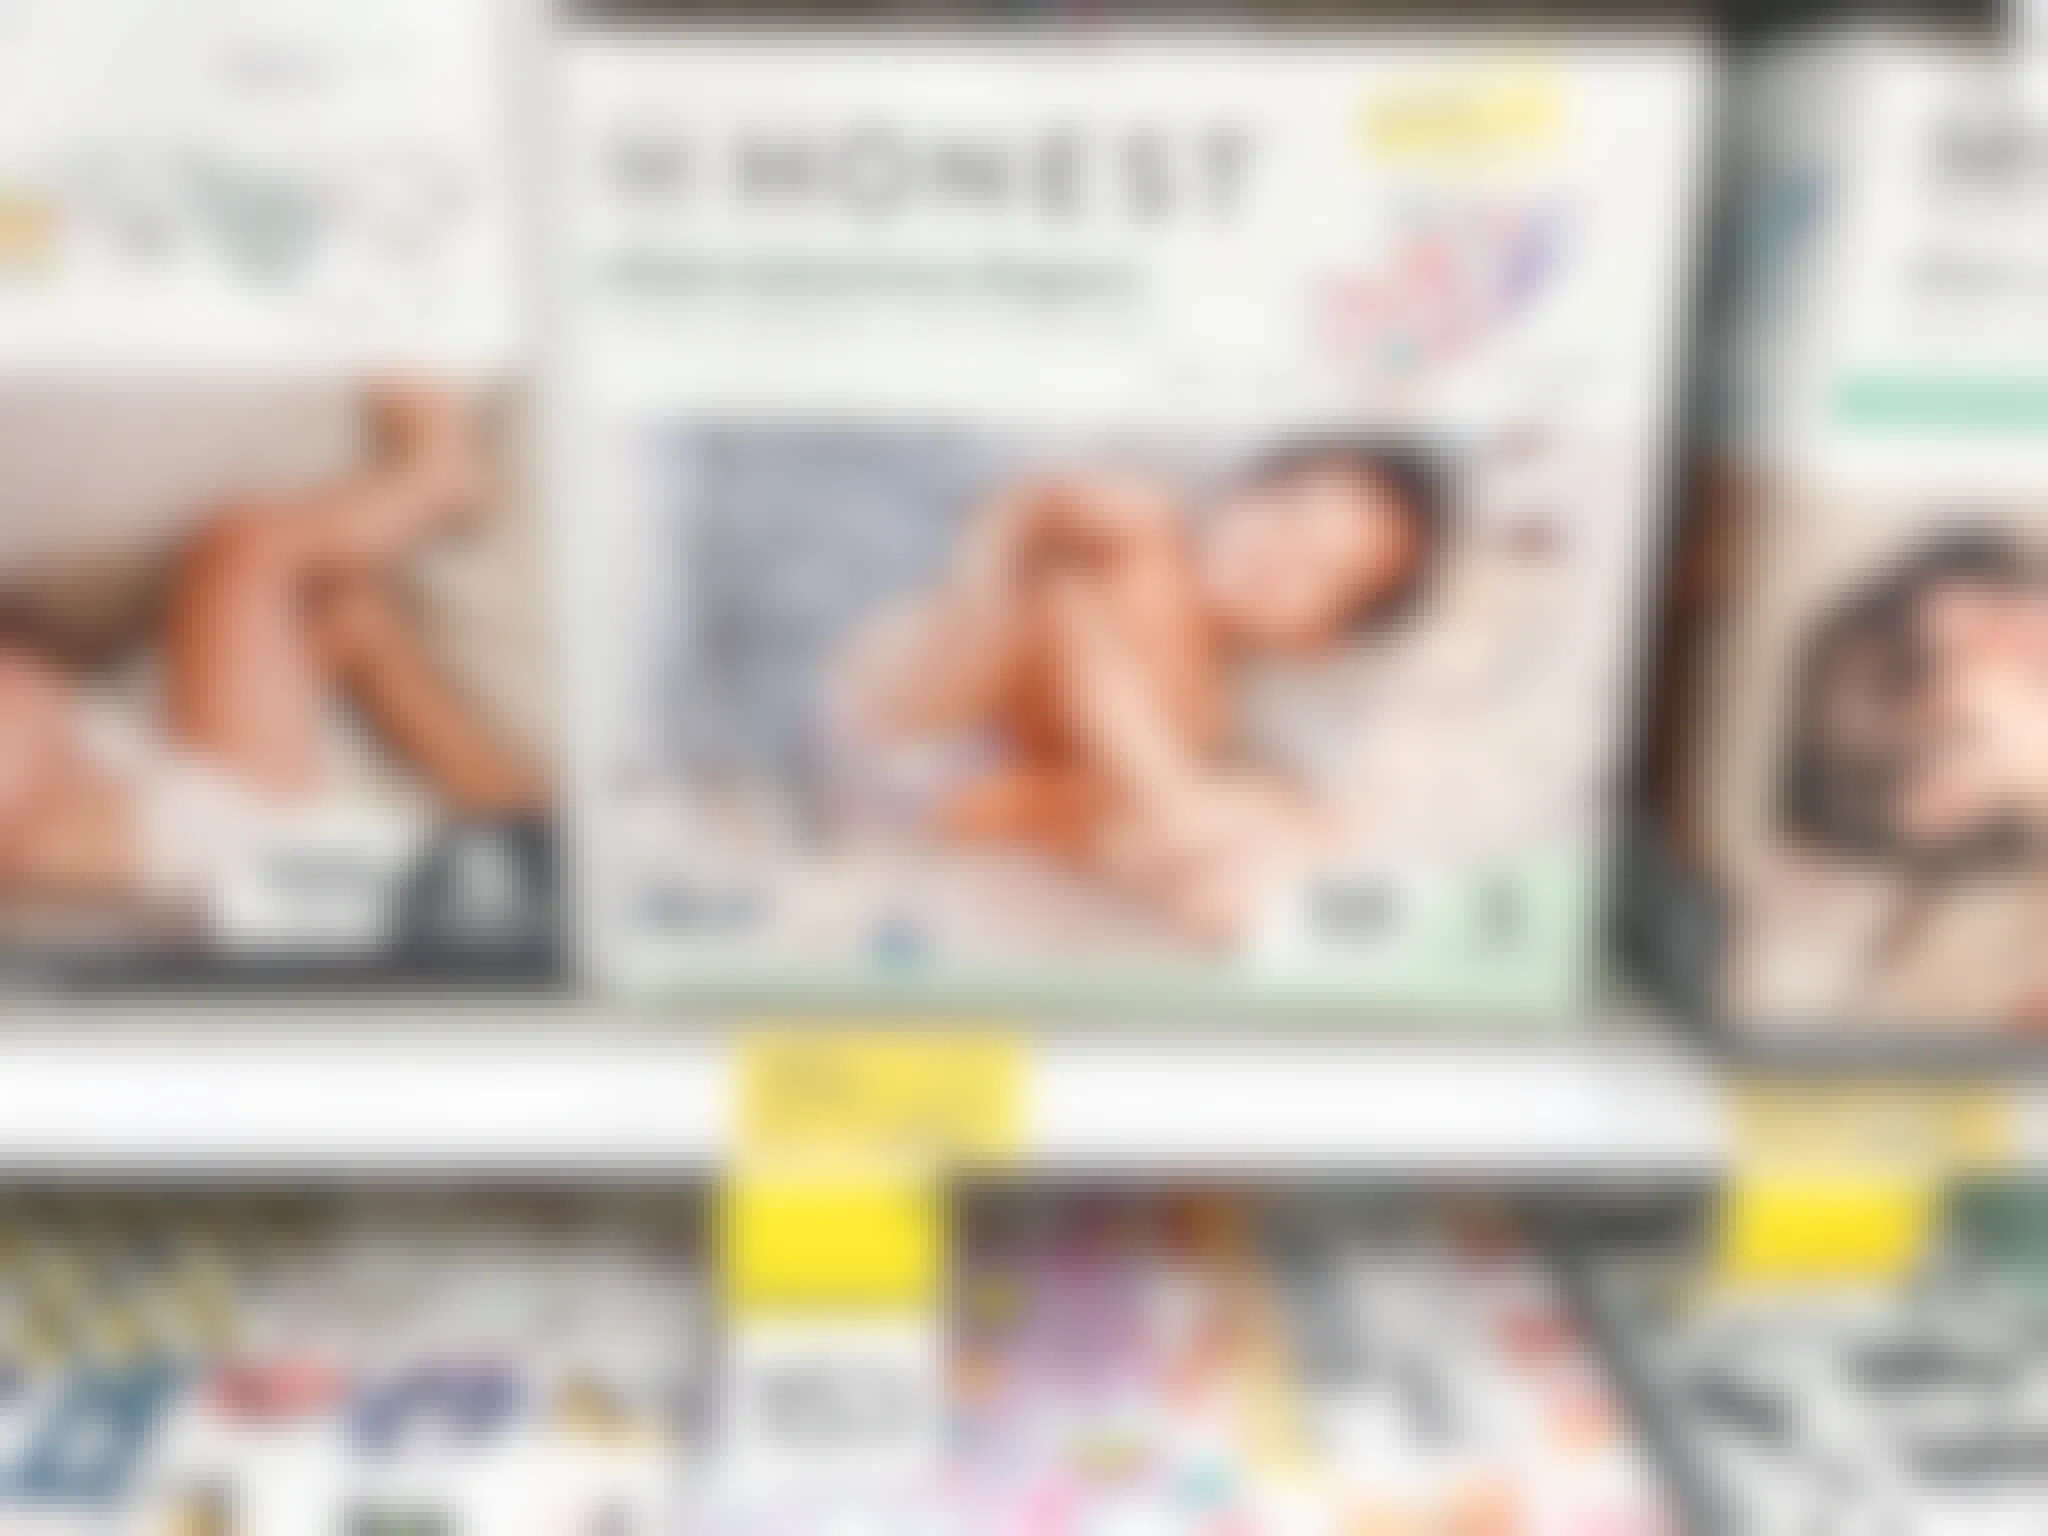 honest size 5 diapers on target shelf